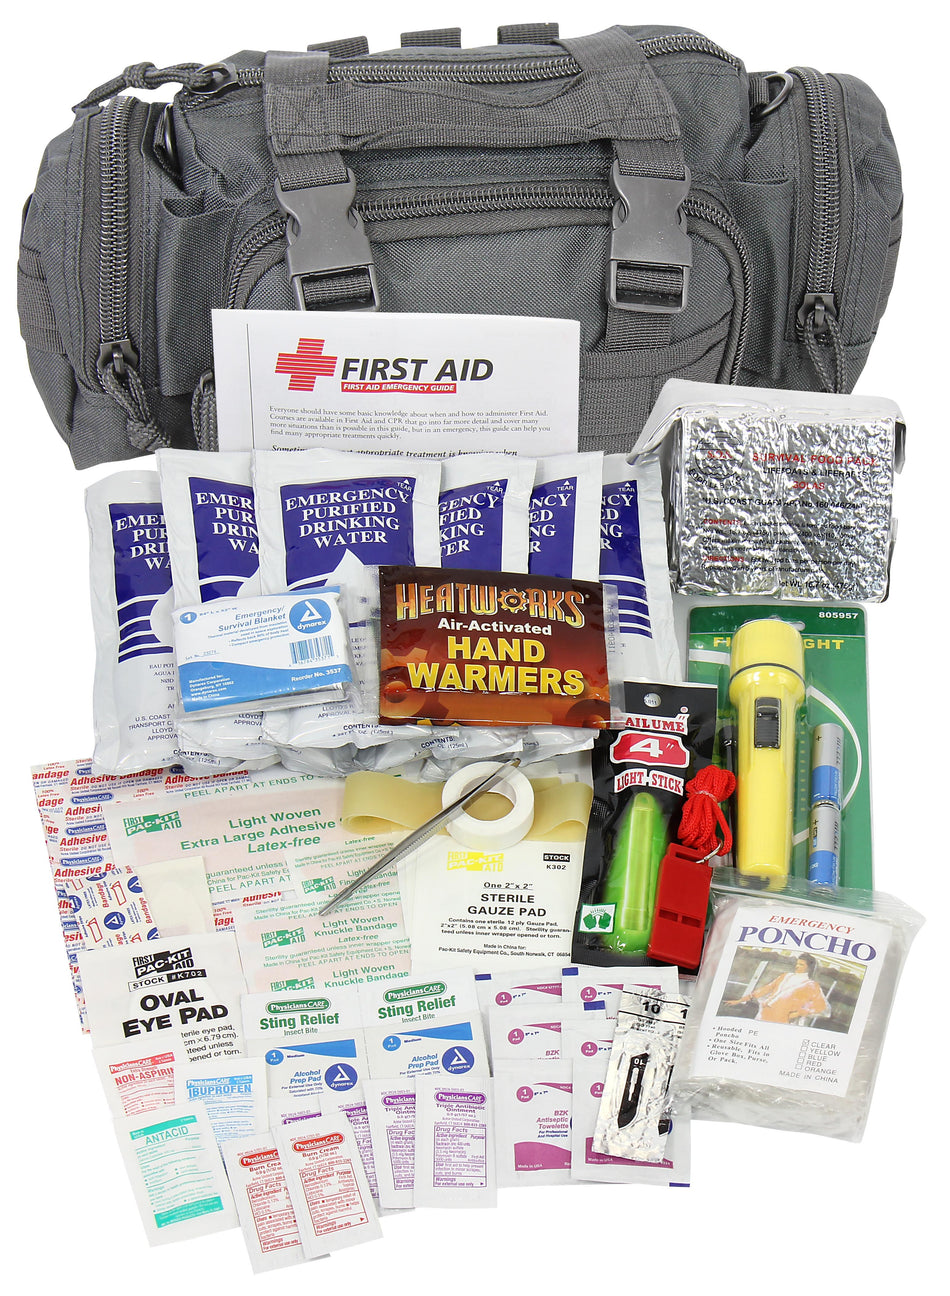 90430-001 First Aid Only Camillus First Aid 3 Day Survival Kit with Emergency Food and Water, Black (73 Piece Kit) - Sold per Each